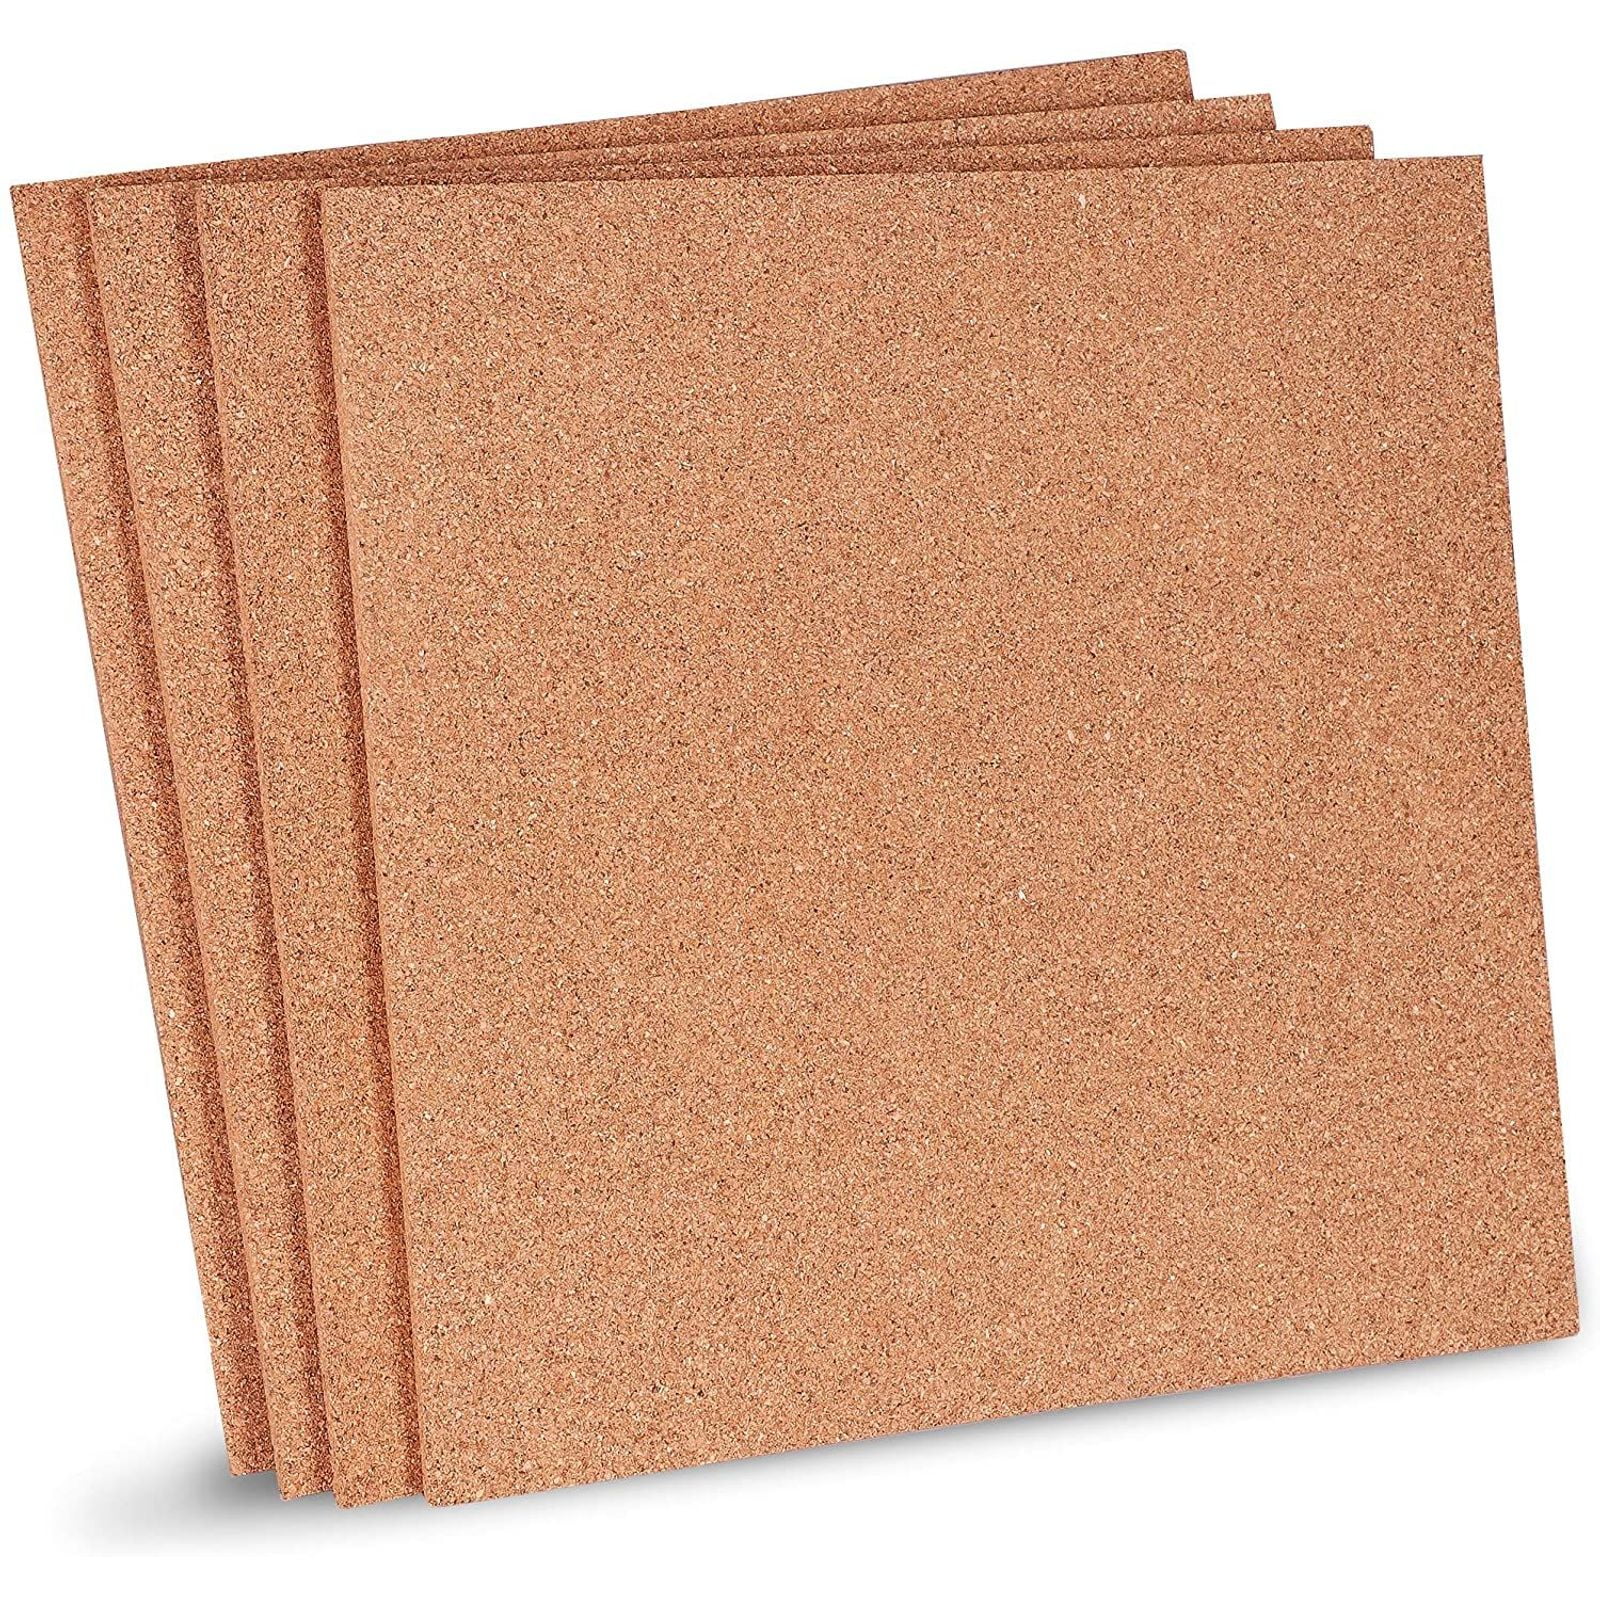 40'x4'x1/4"THICK CORK ROLL bulletin message board panel acoustic sheet wall tile 